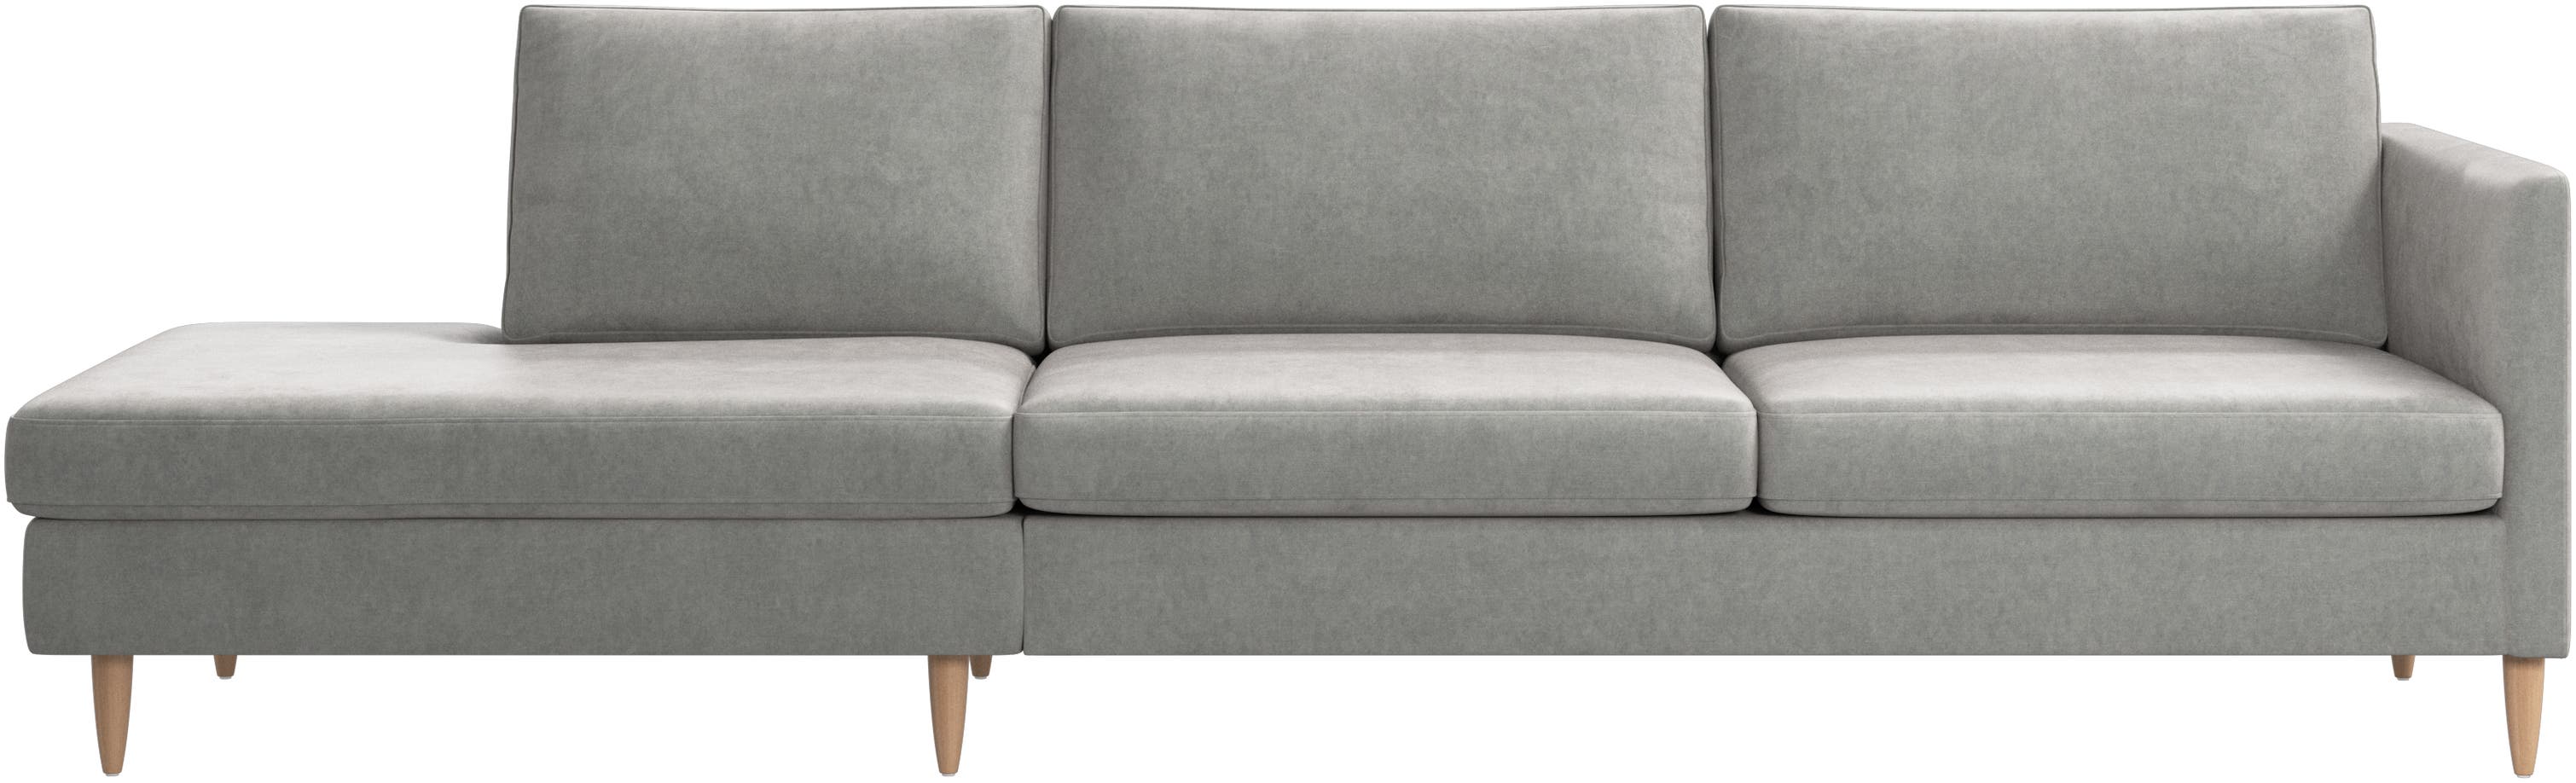 Indivi sofa with lounging unit